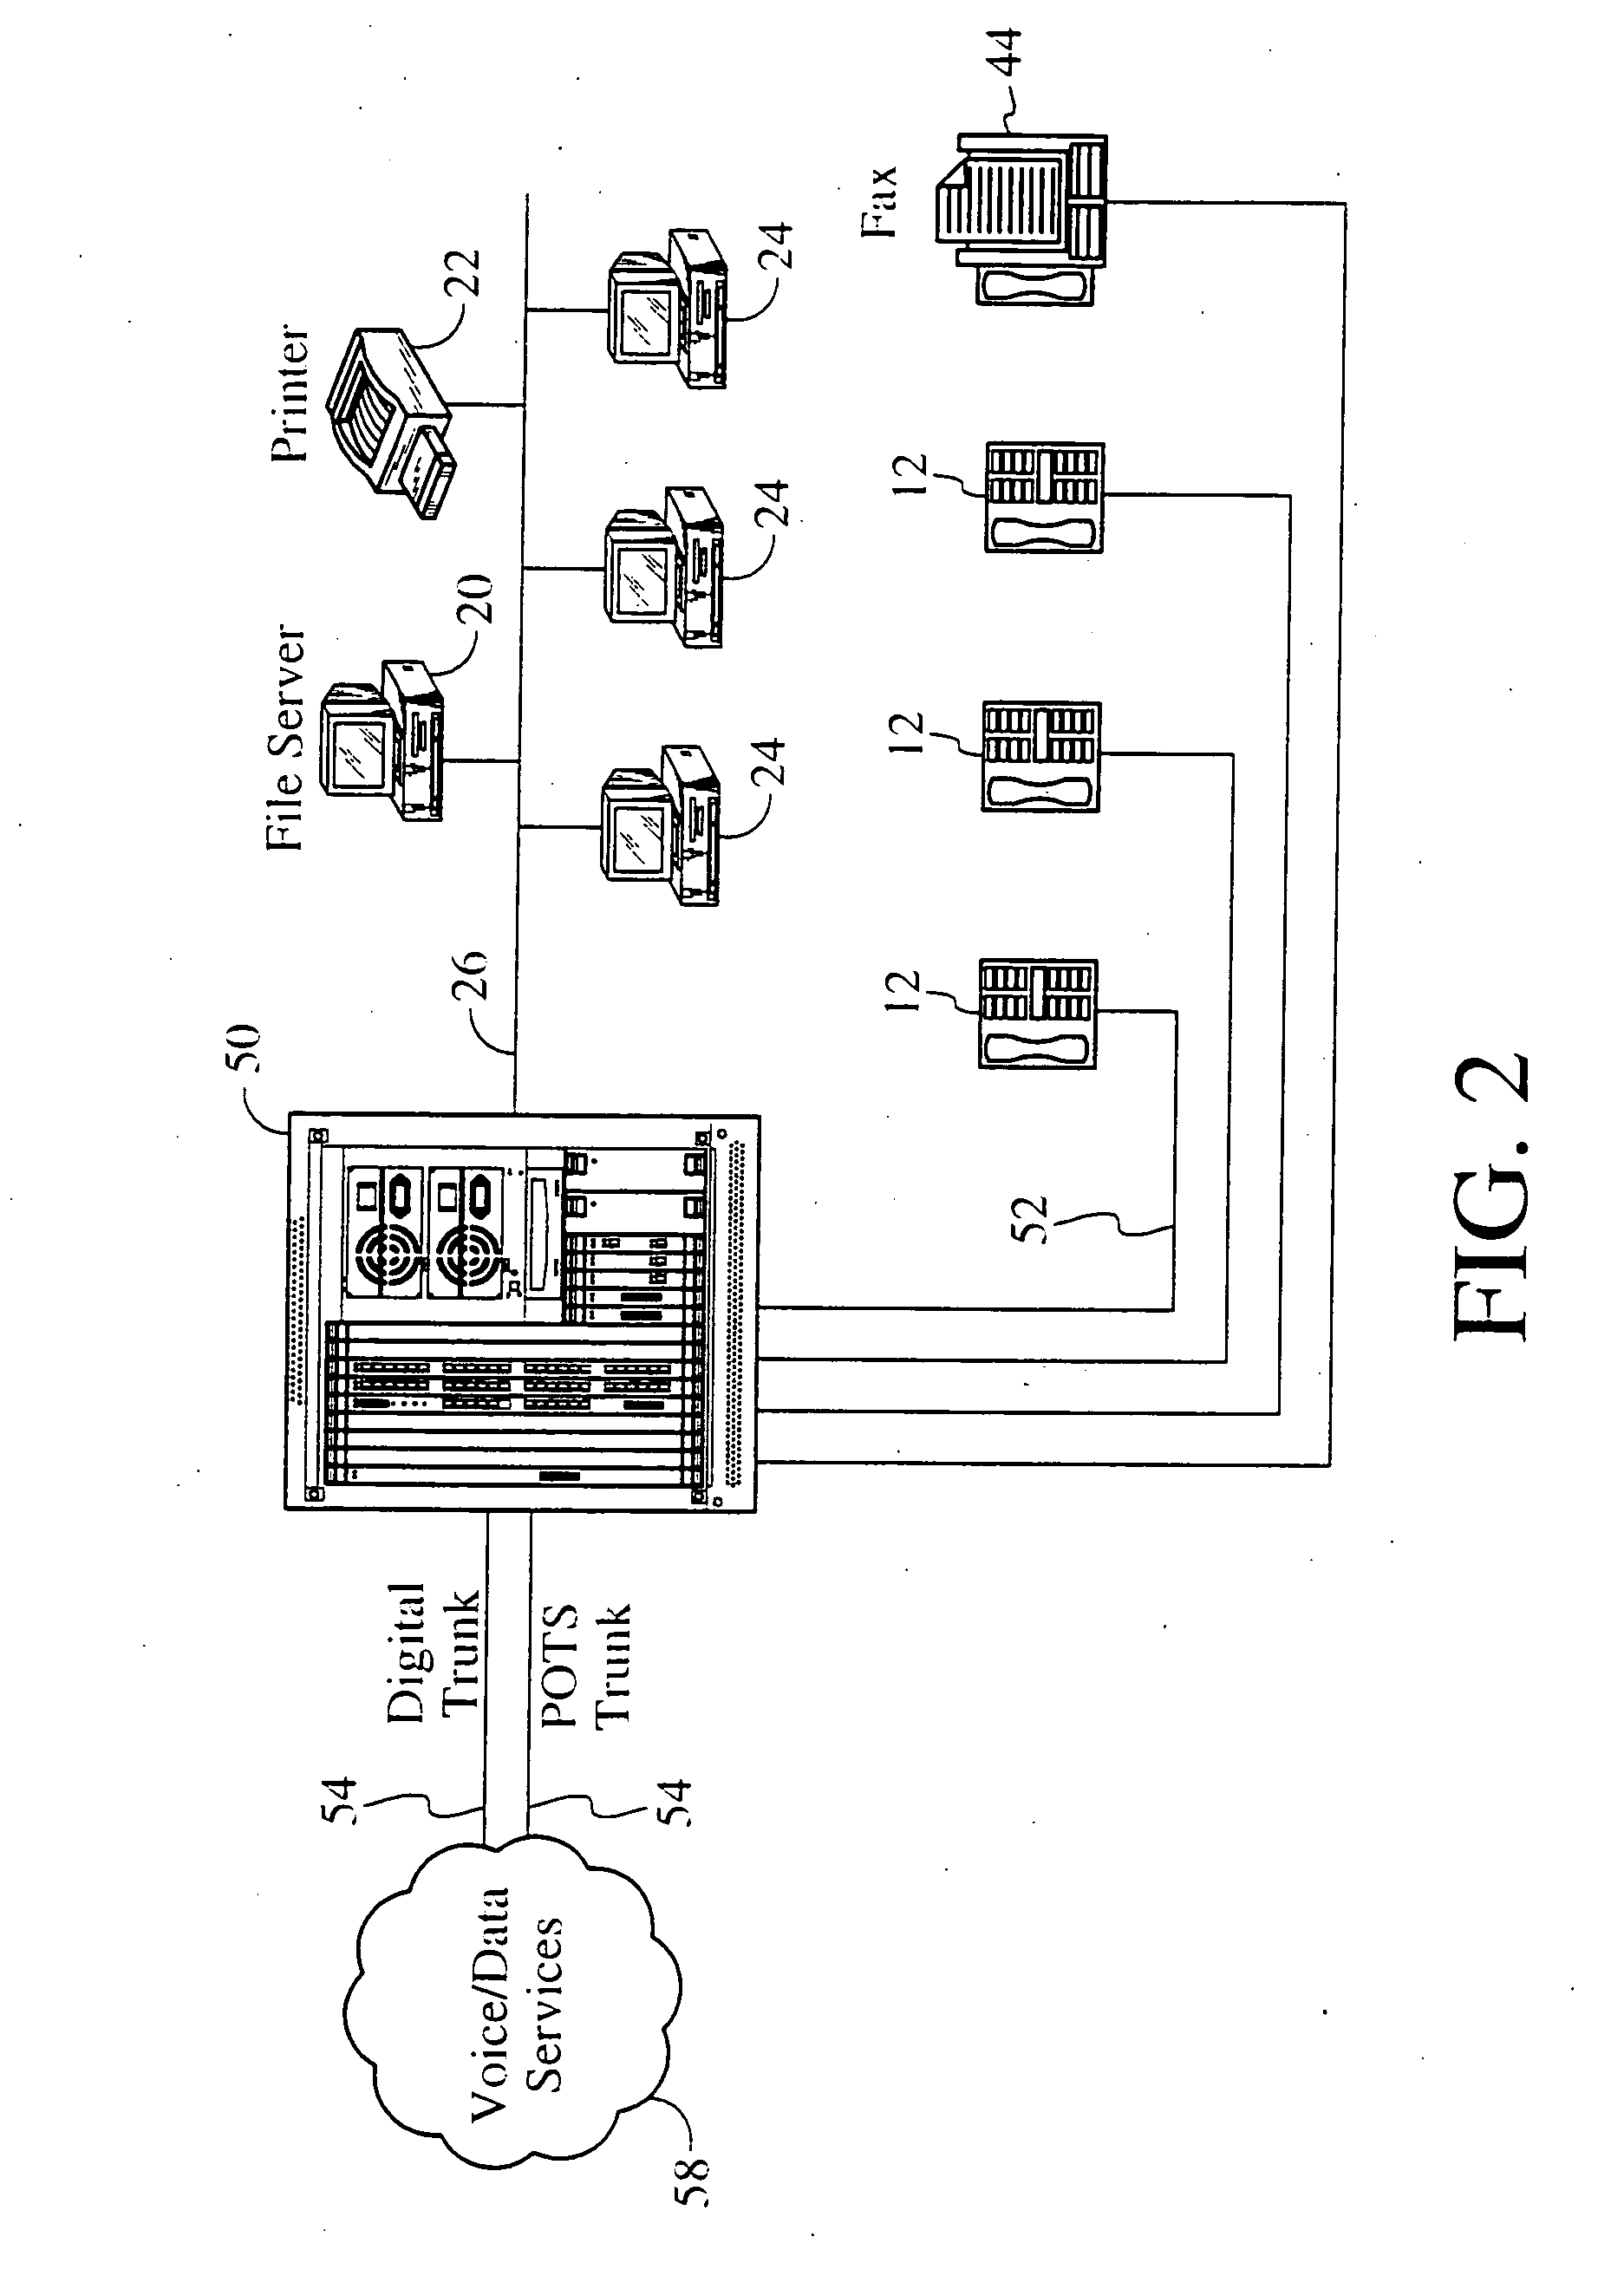 Systems and methods for multiple mode voice and data communications using intelligenty bridged TDM and packet buses